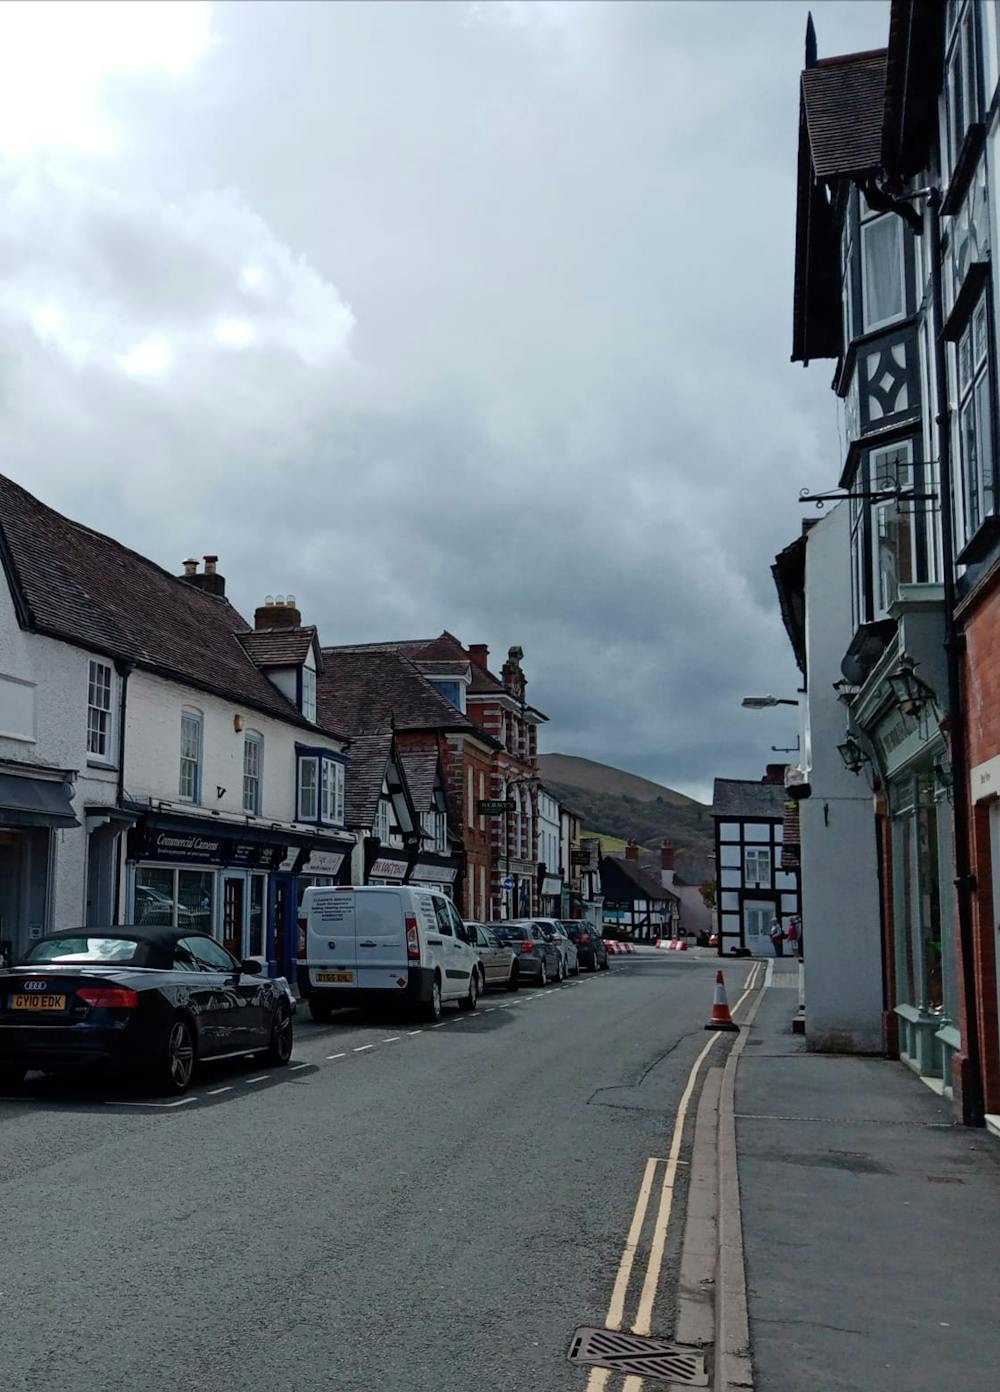 Church Stretton - the start point for the hike